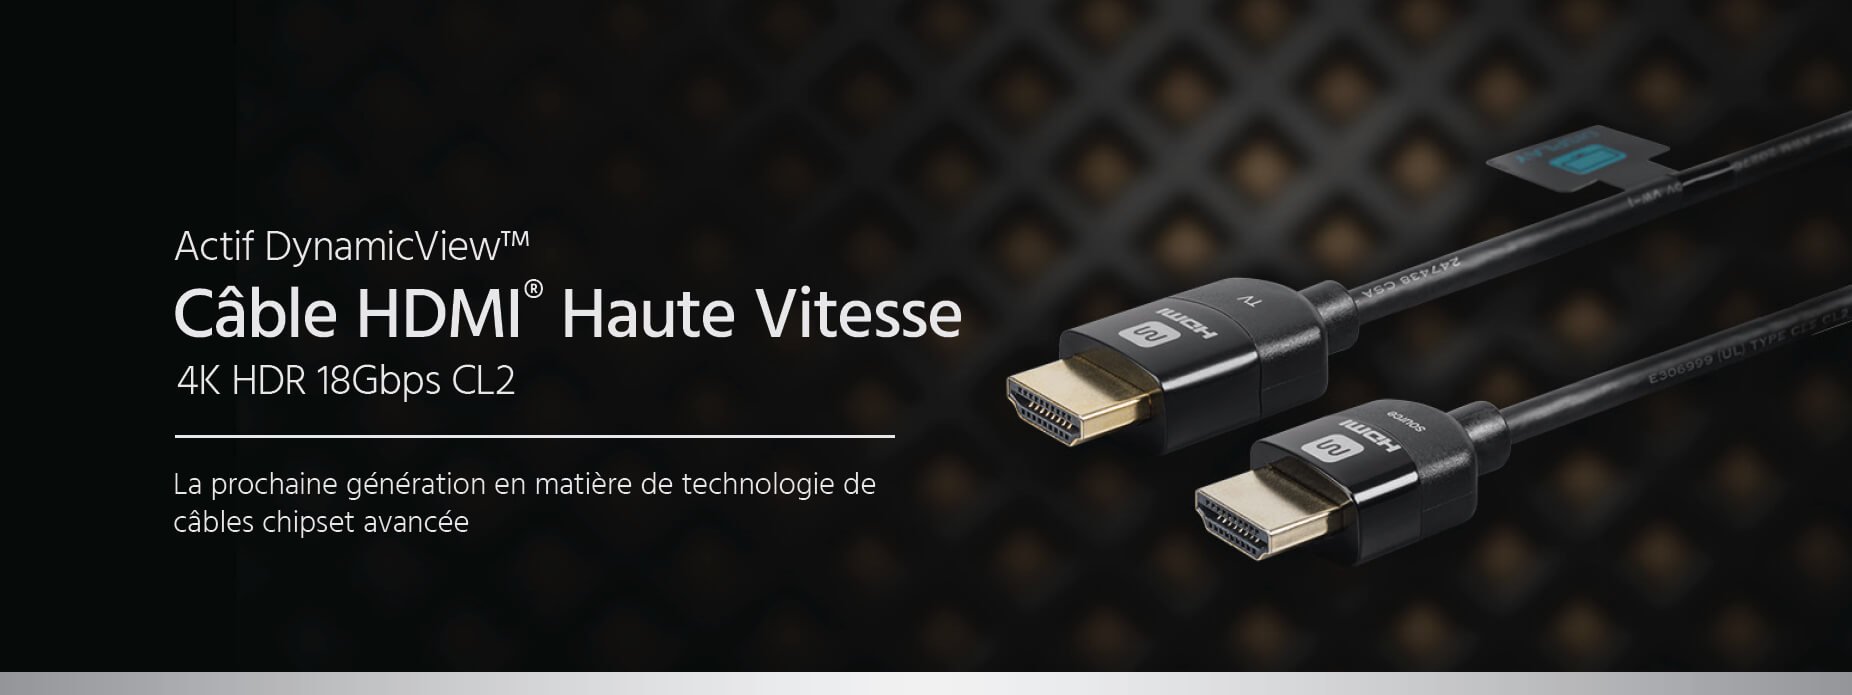 DynamicView Active High Speed HDMI Cable